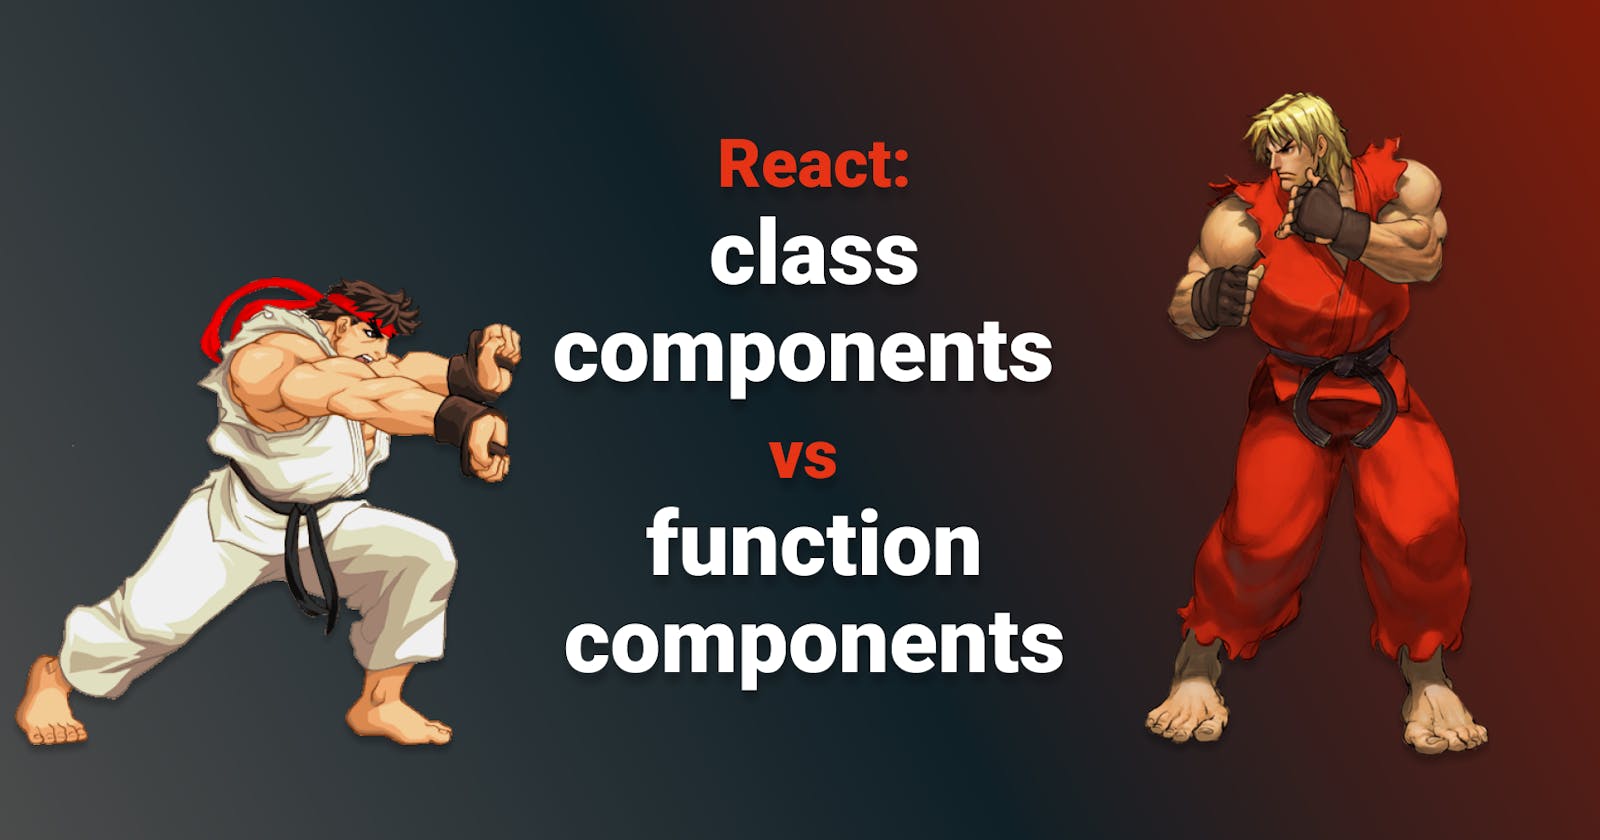 React: class components vs function components